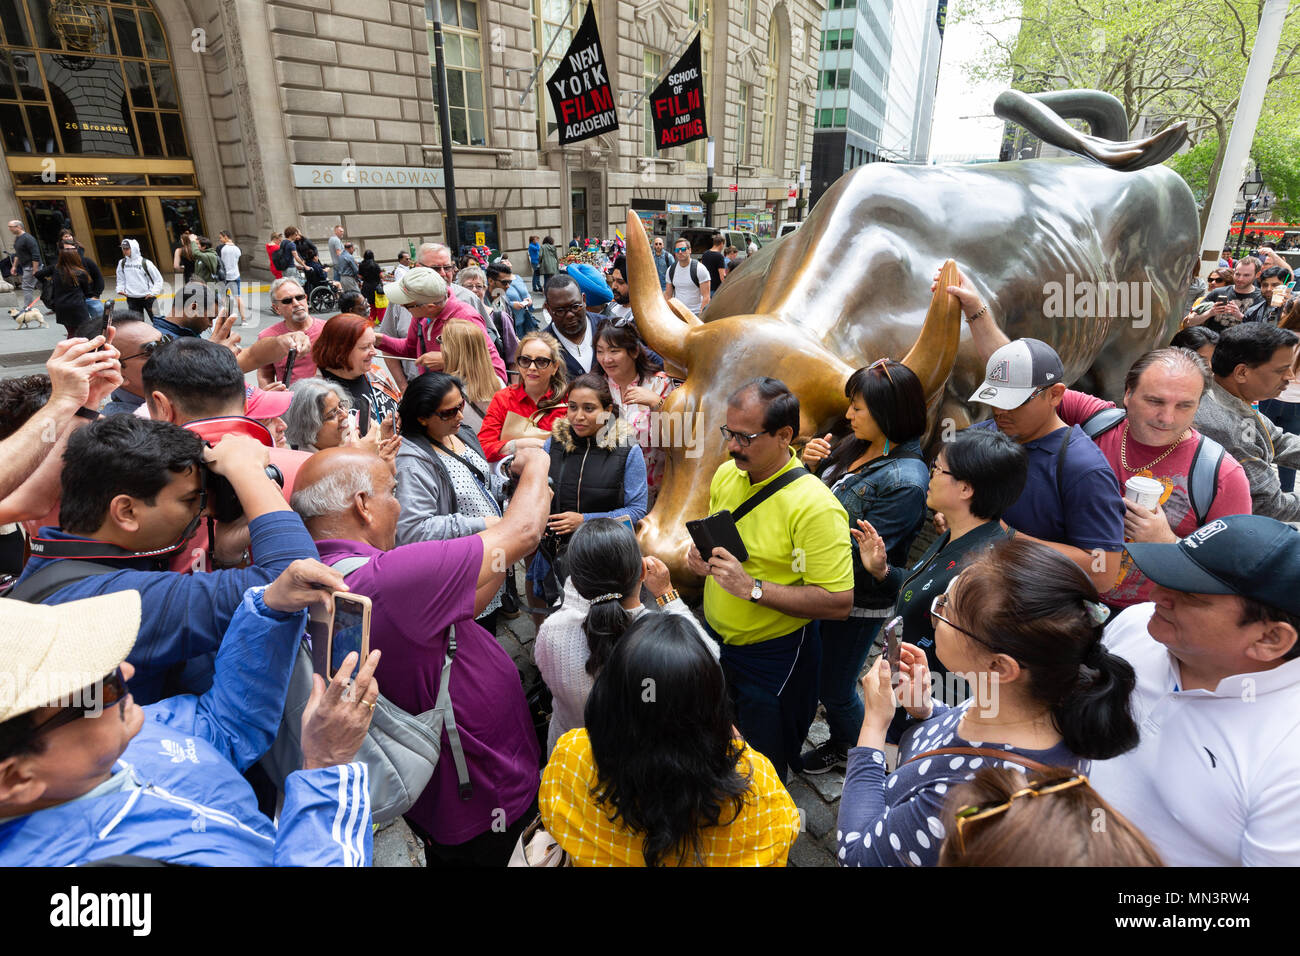 Crowds of tourists taking photos around the Wall street bull, or Charging Bull, by Arturo Di Modica, Downtown New York City, USA Stock Photo